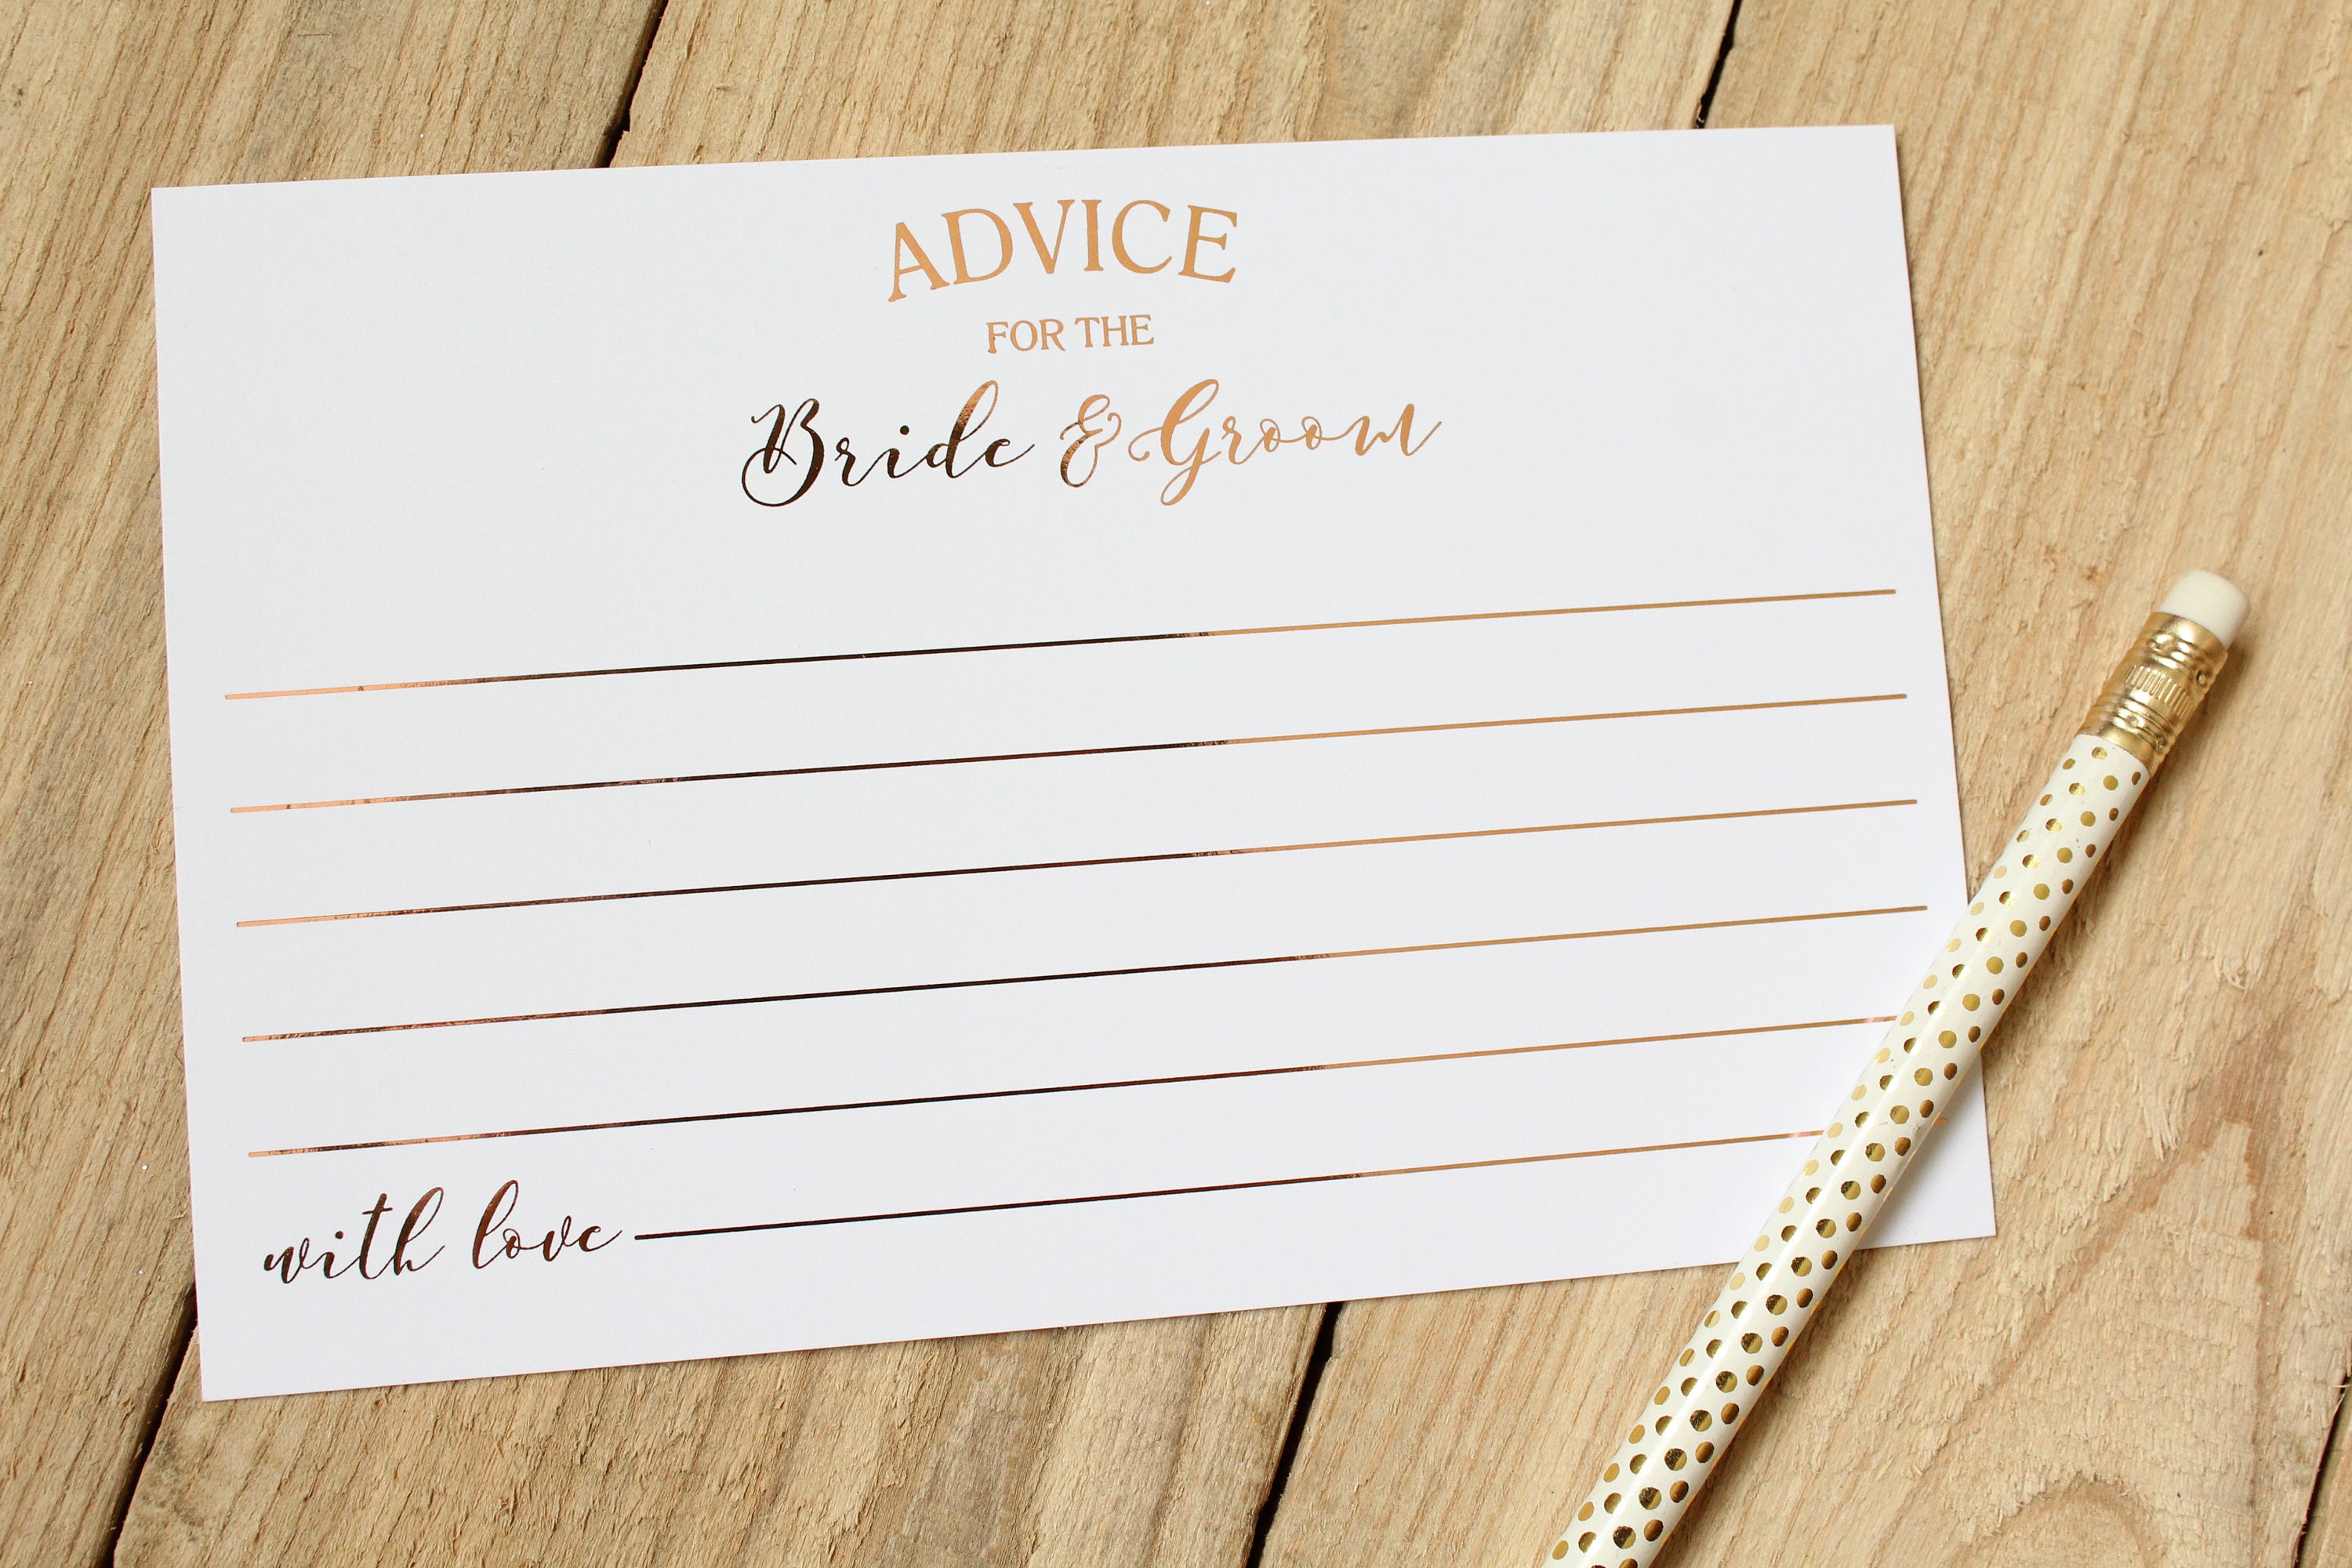 Wedding Advice Cards For The Bride And Groom For Guest Tables Etsy 